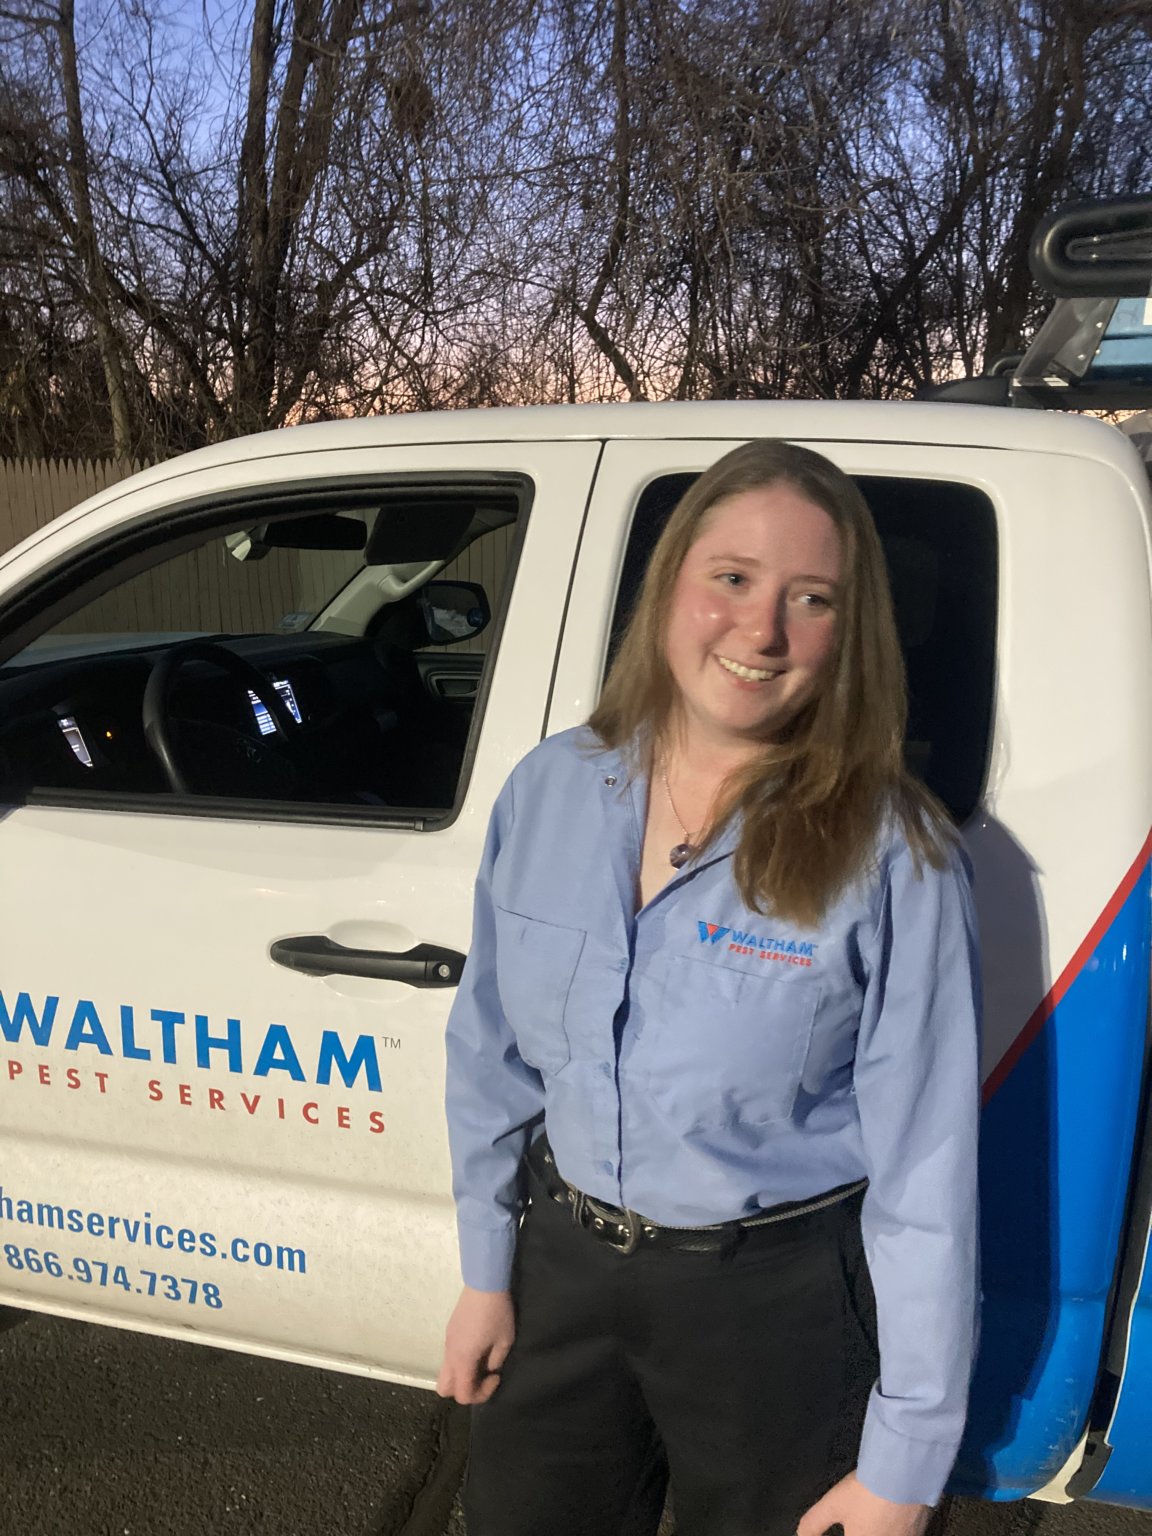 Women in Pest Control - Waltham Pest Services